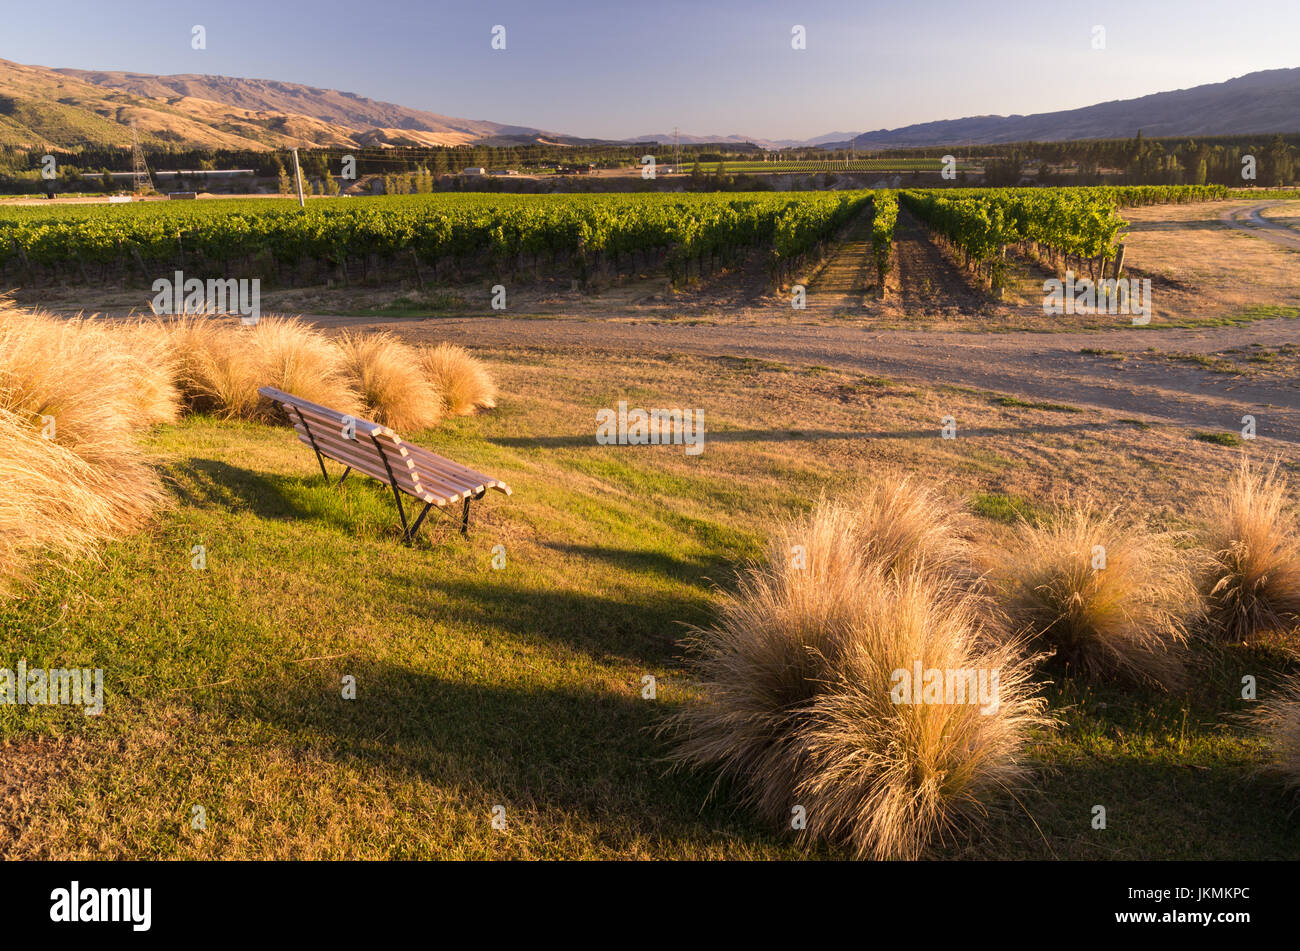 A bench with a view looking over a vineyard in Bannockburn, Central Otago, South Island of New Zealand Stock Photo